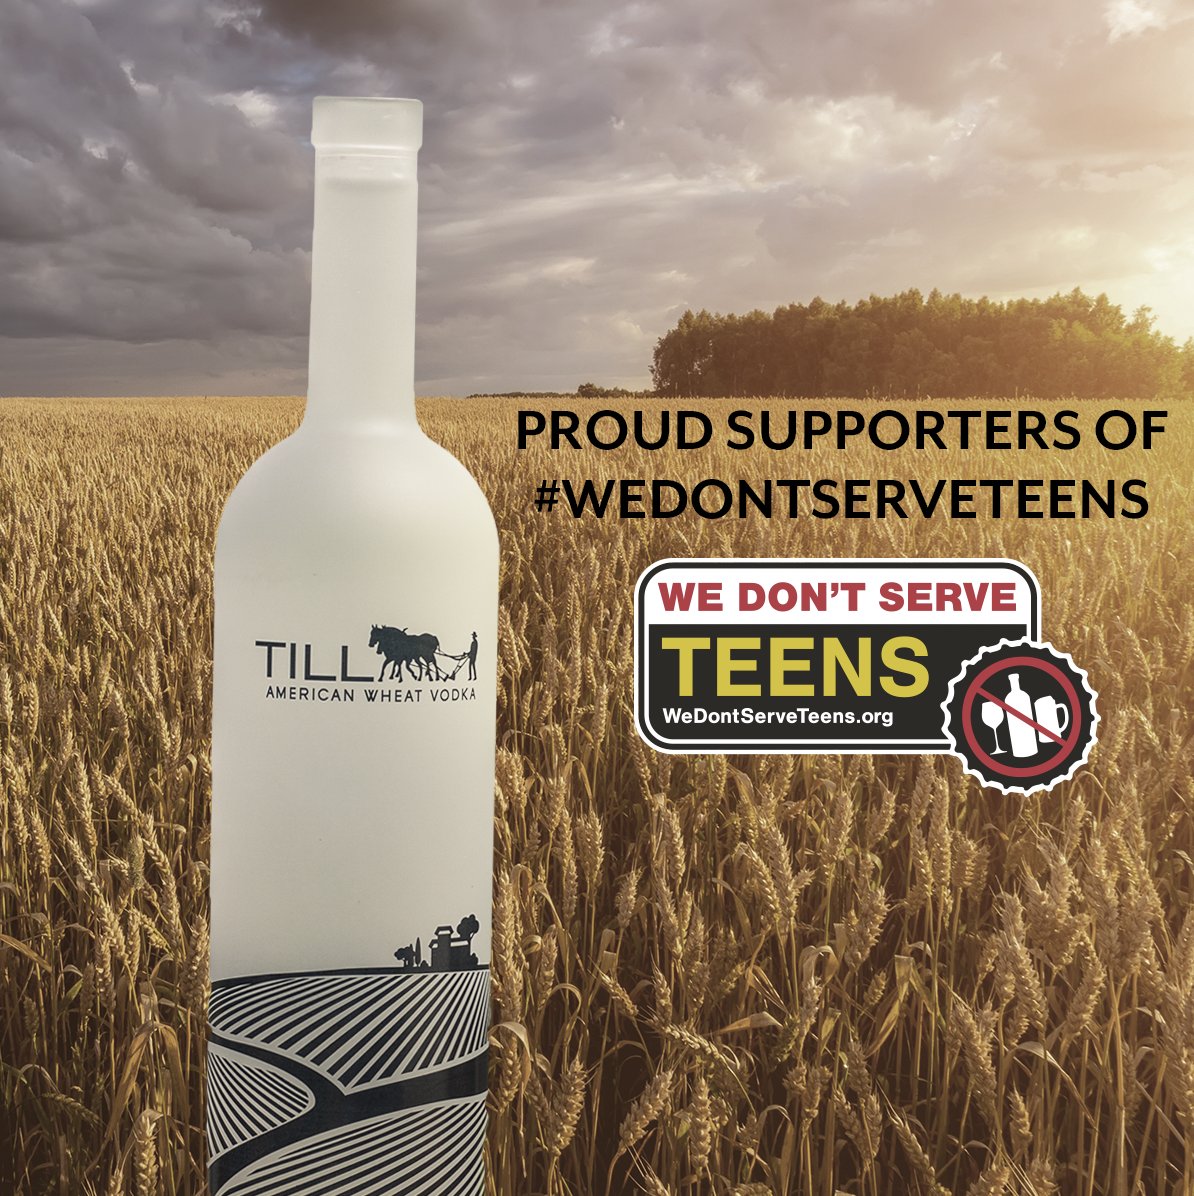 TILL Vodka is proud to support the #WeDontServeTeens campaign by never serving, supplying or selling alcohol to anyone under the legal drinking age. Learn more at wedontserveteens.org #WDST